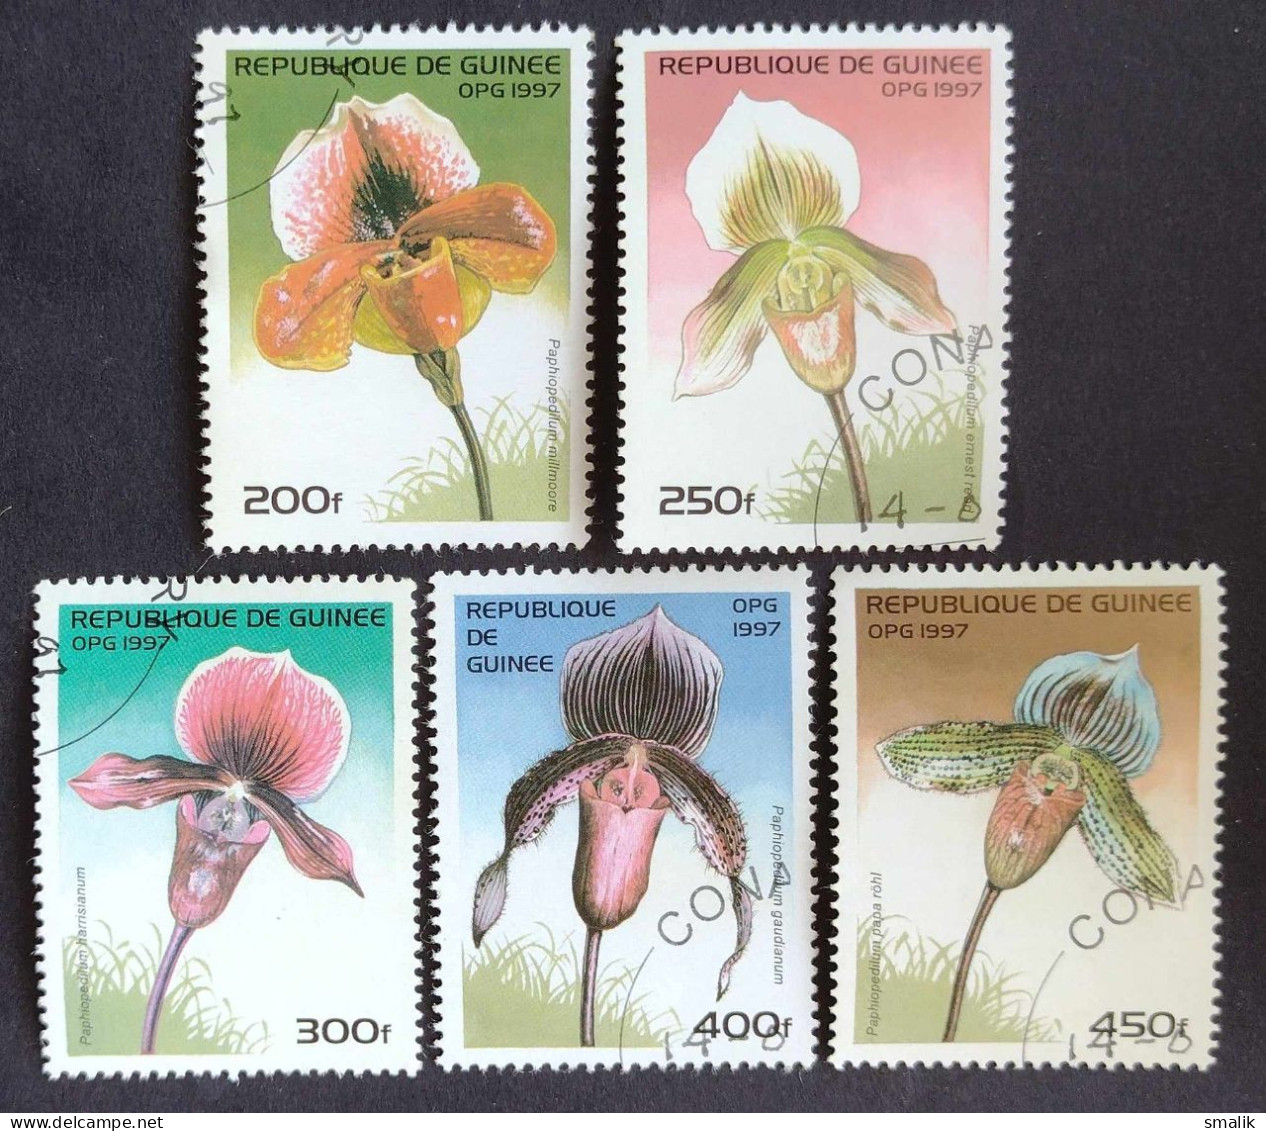 GUINEE REPUBLIC 1997 - Flowers, Set Of 5 Stamps, Fine Used - Guinée (1958-...)